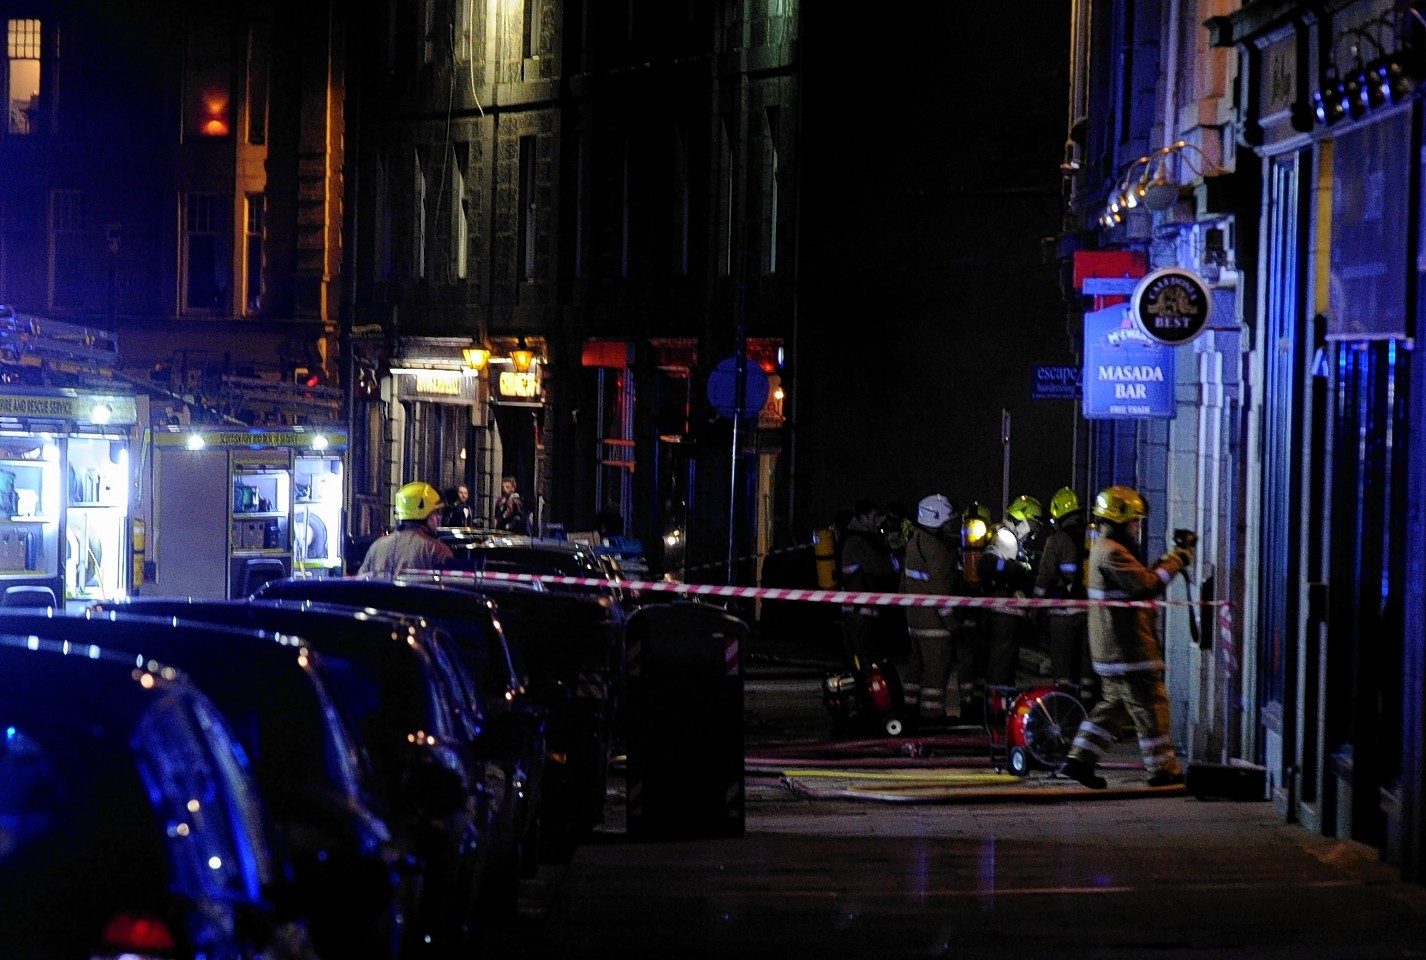 The pub was evacuated before the fire crews arrived